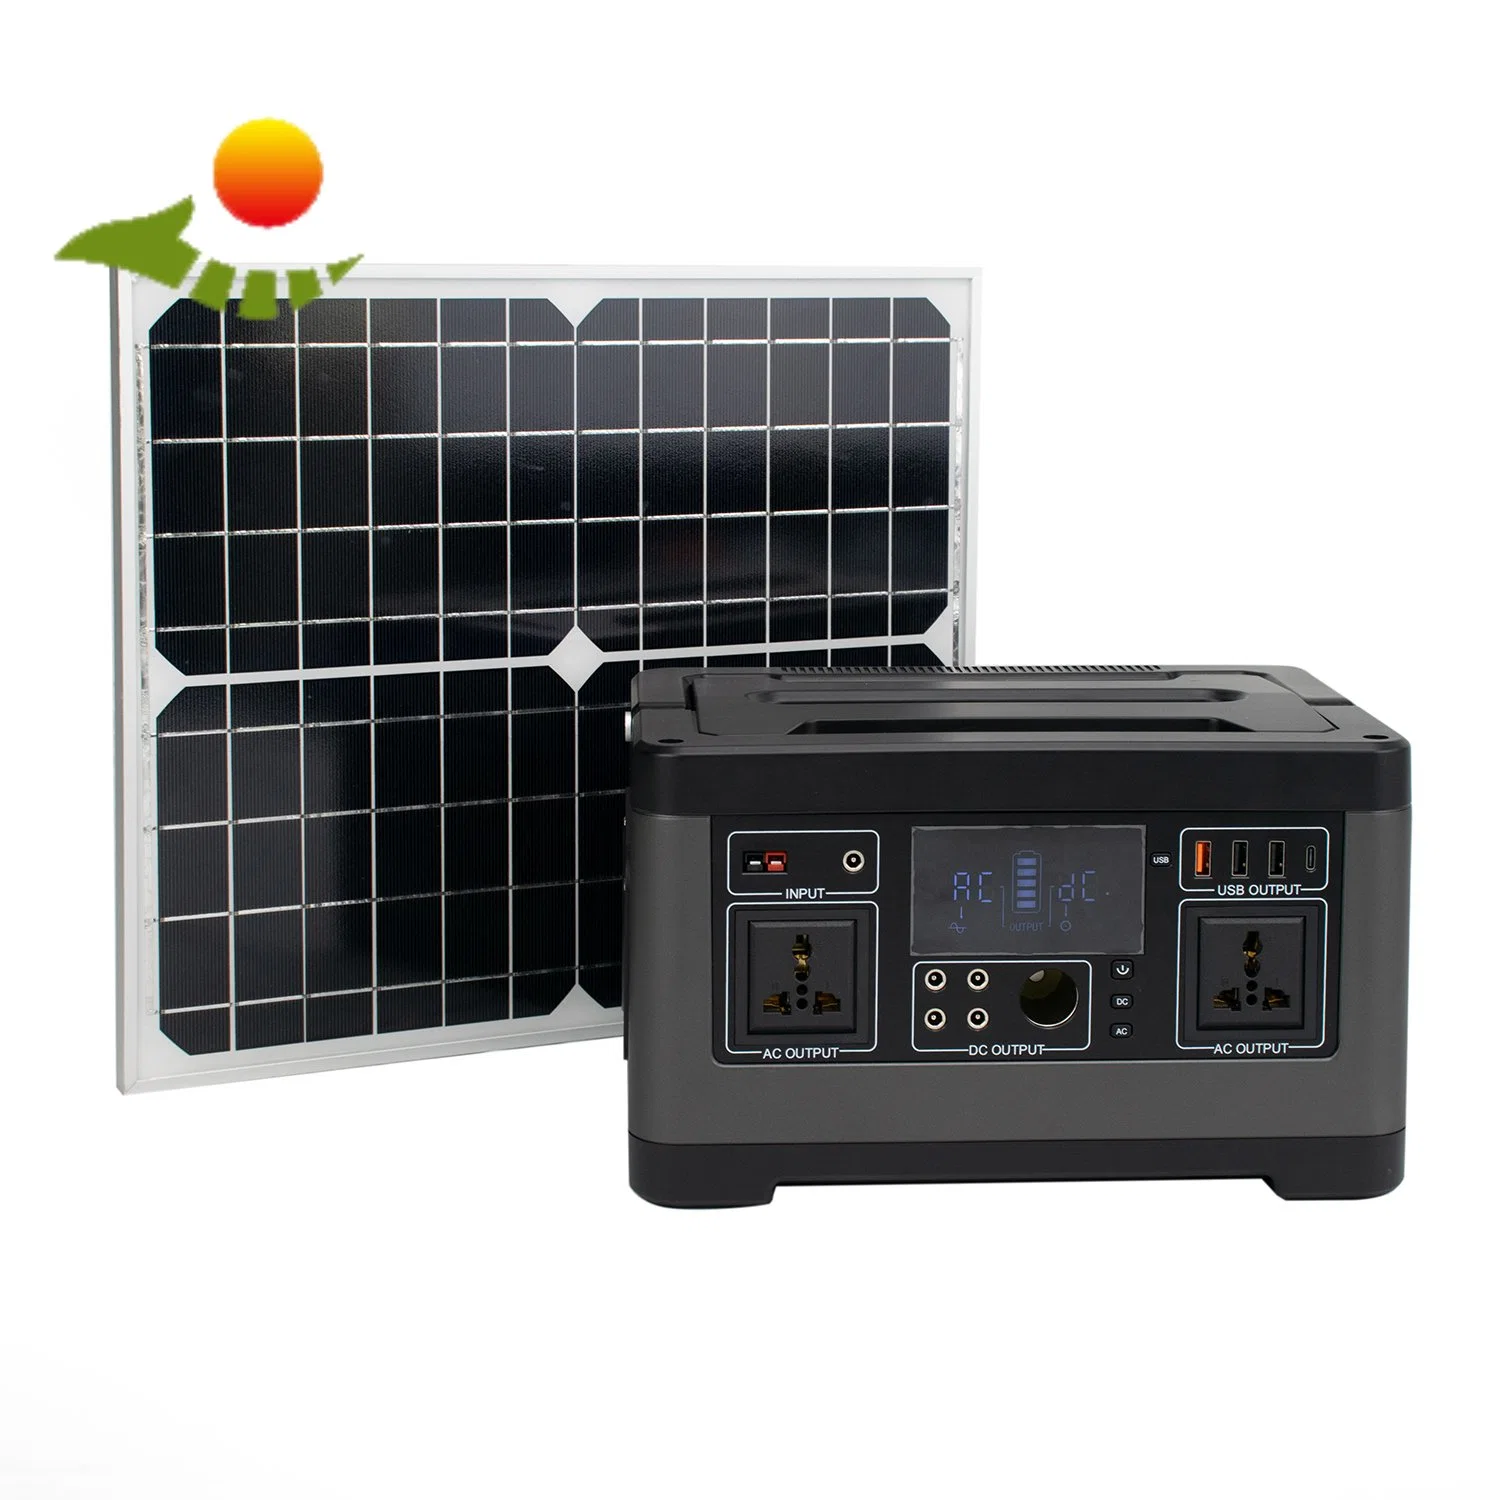 Portable Emergency Charging Station Inverter DC 12V Output 140400mAh Lithium Battery The Solar and Electronic Car Input The Power